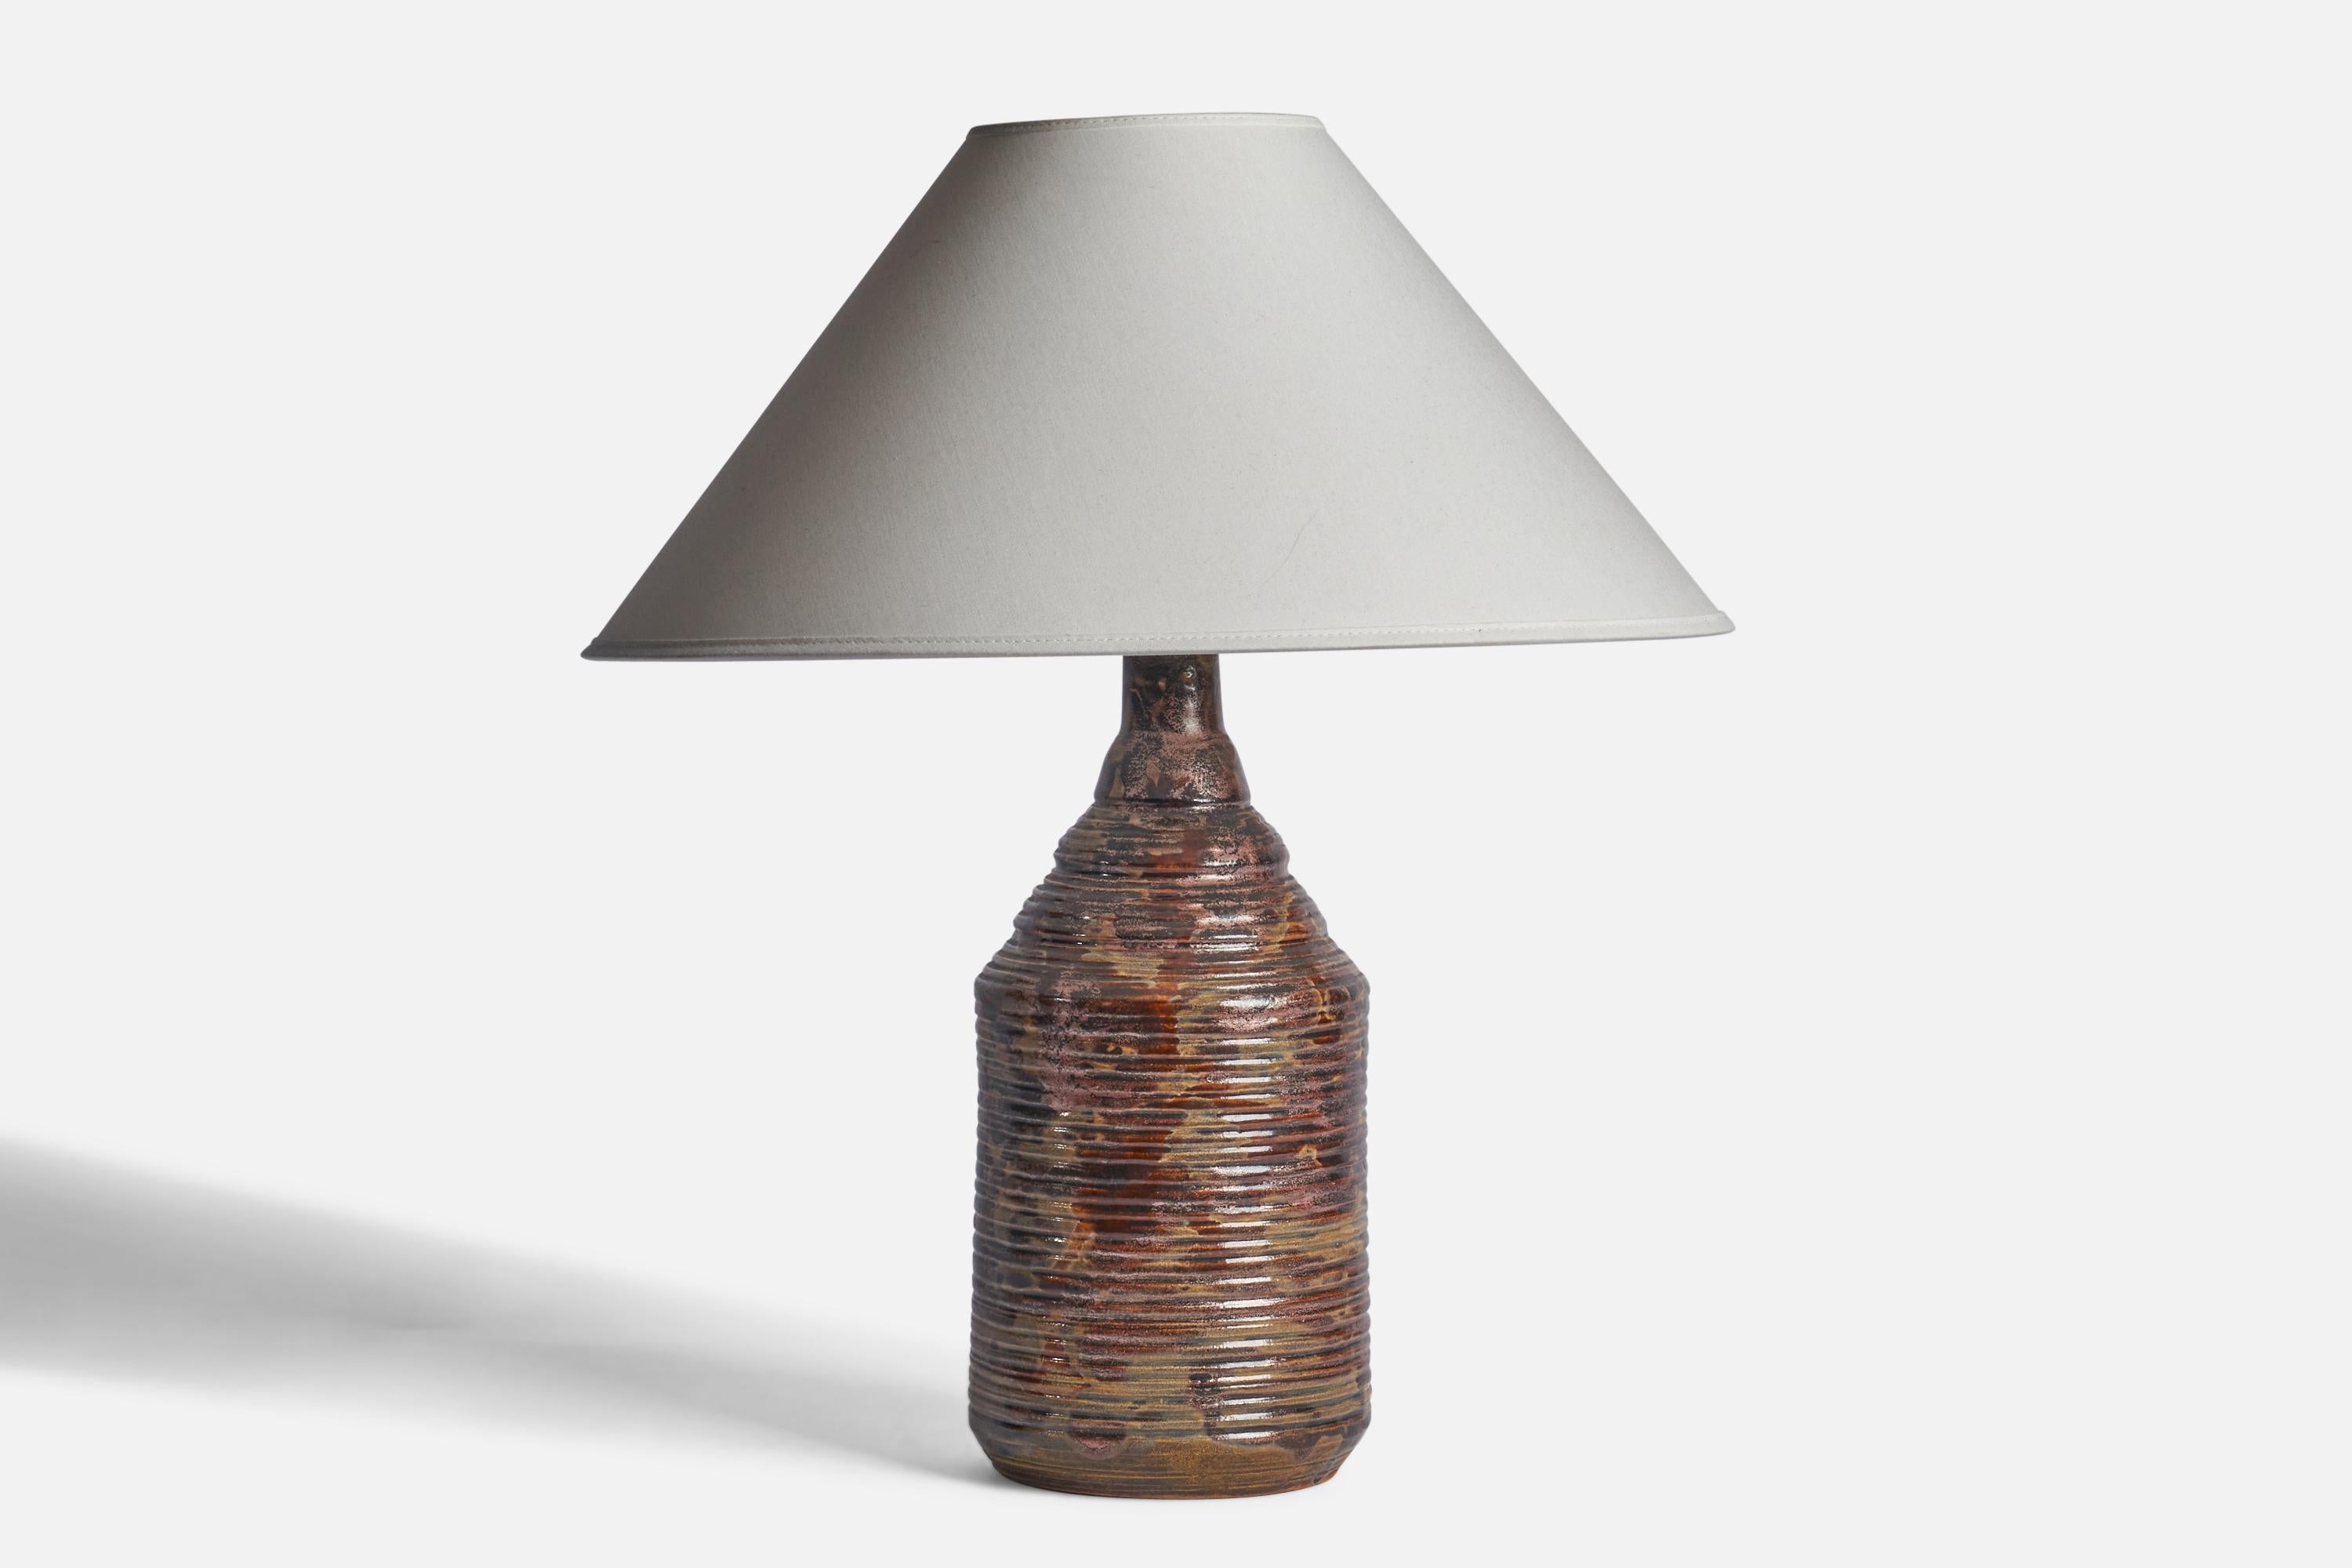 An incised brown-glazed stoneware table lamp designed and produced in Sweden, c. 1960s.

Dimensions of Lamp (inches): 14” H x 6